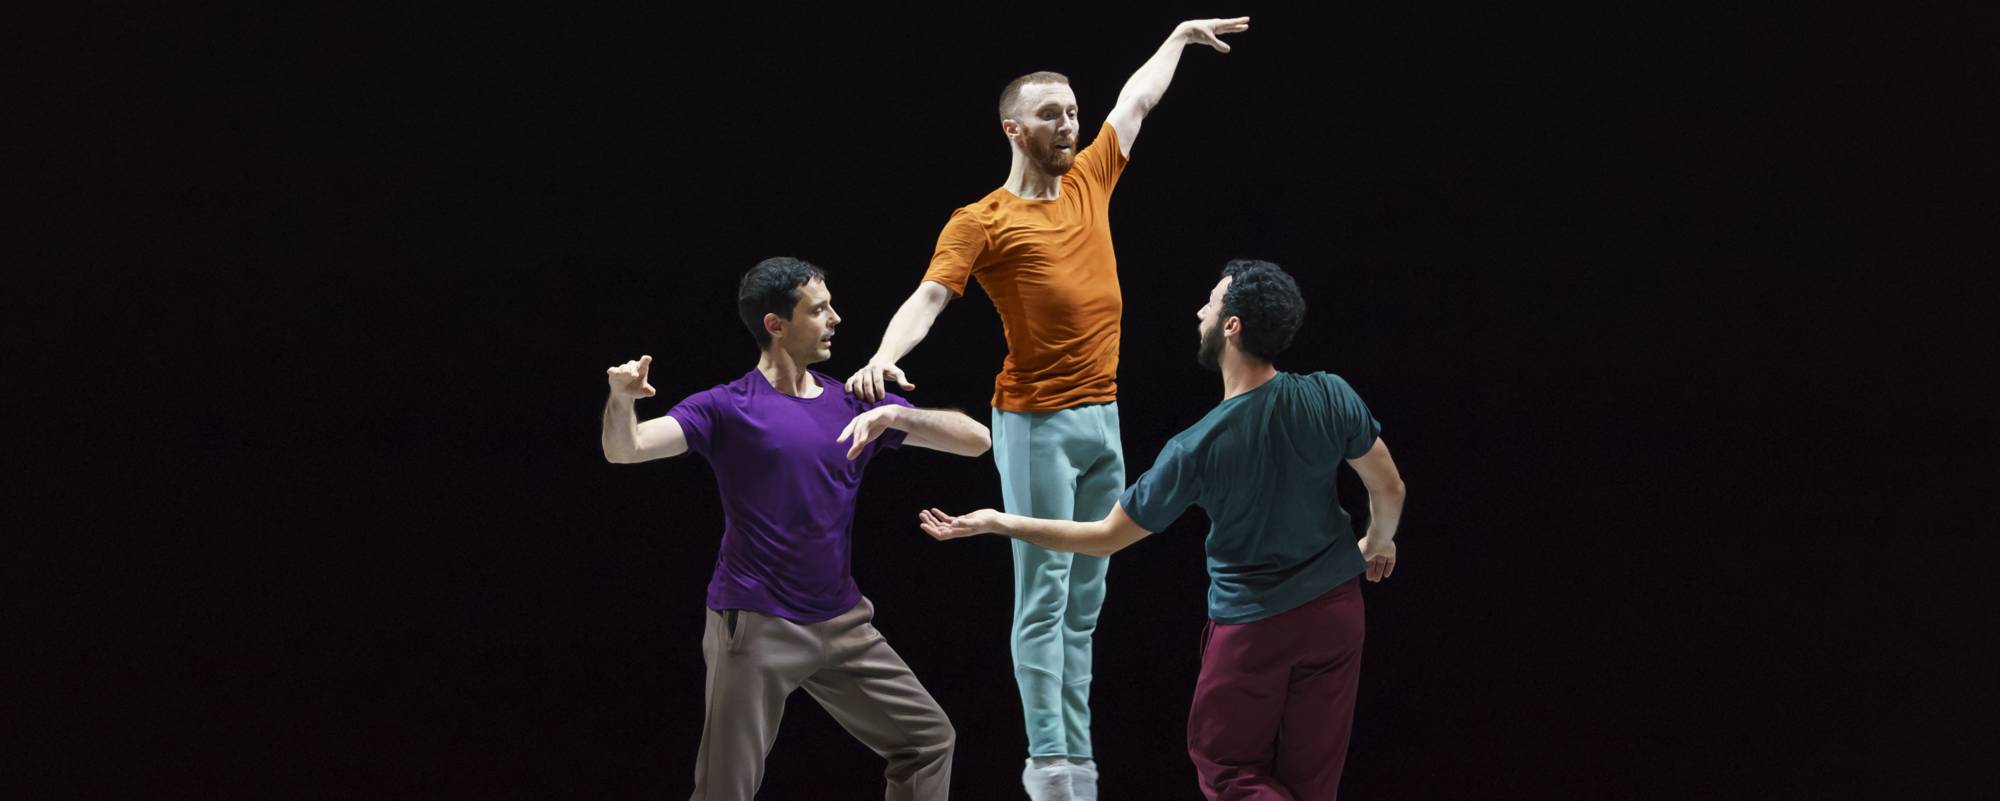 A Sadler's Wells London Production: William FORSYTHE  “ A Quiet Evening of Dance ”